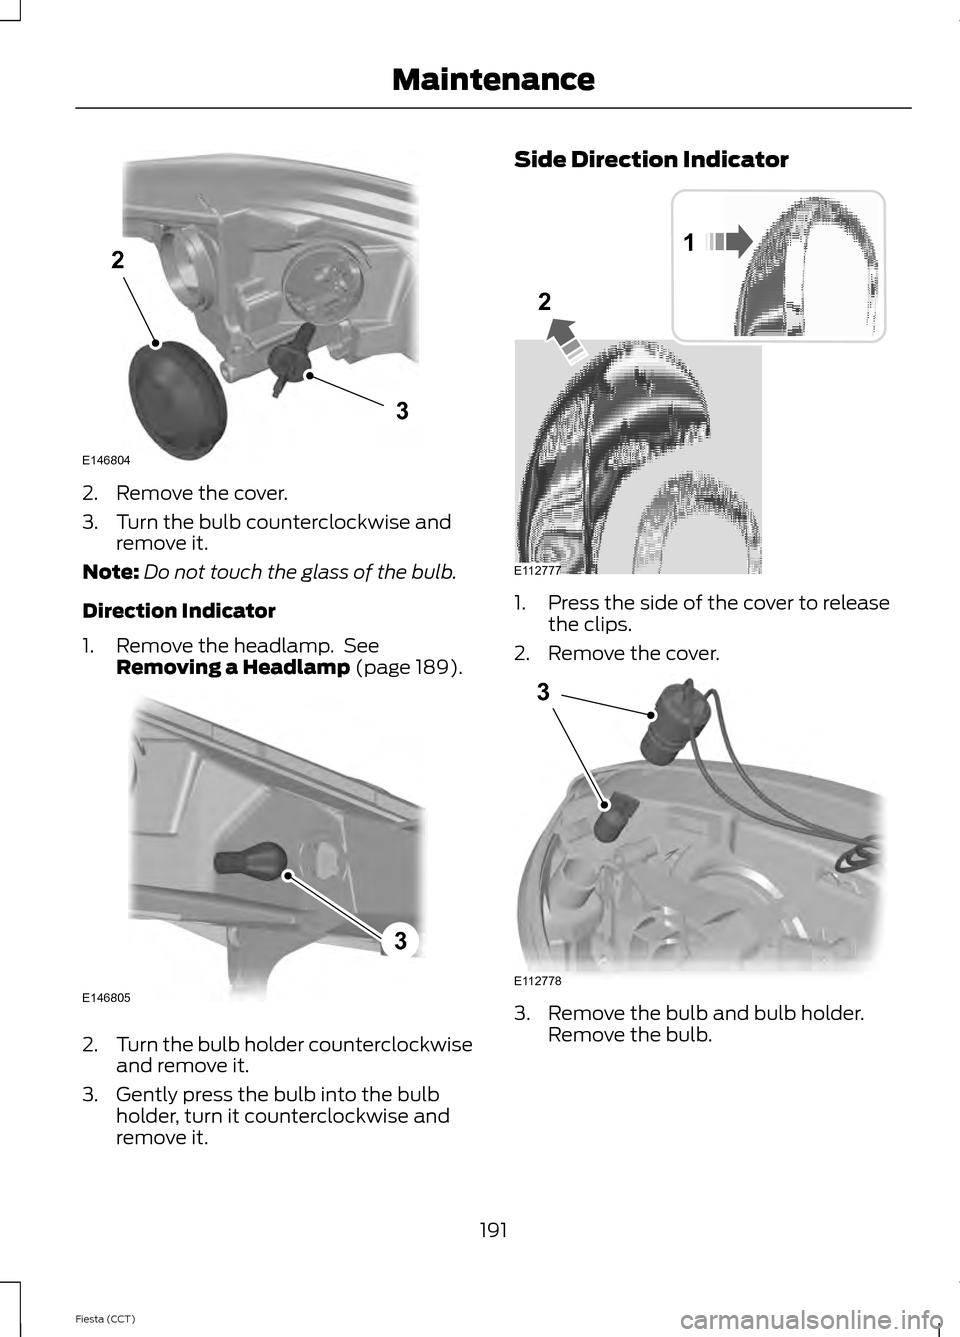 FORD FIESTA 2014 6.G User Guide 2. Remove the cover.
3. Turn the bulb counterclockwise and
remove it.
Note: Do not touch the glass of the bulb.
Direction Indicator
1. Remove the headlamp.  See Removing a Headlamp (page 189). 2.
Turn